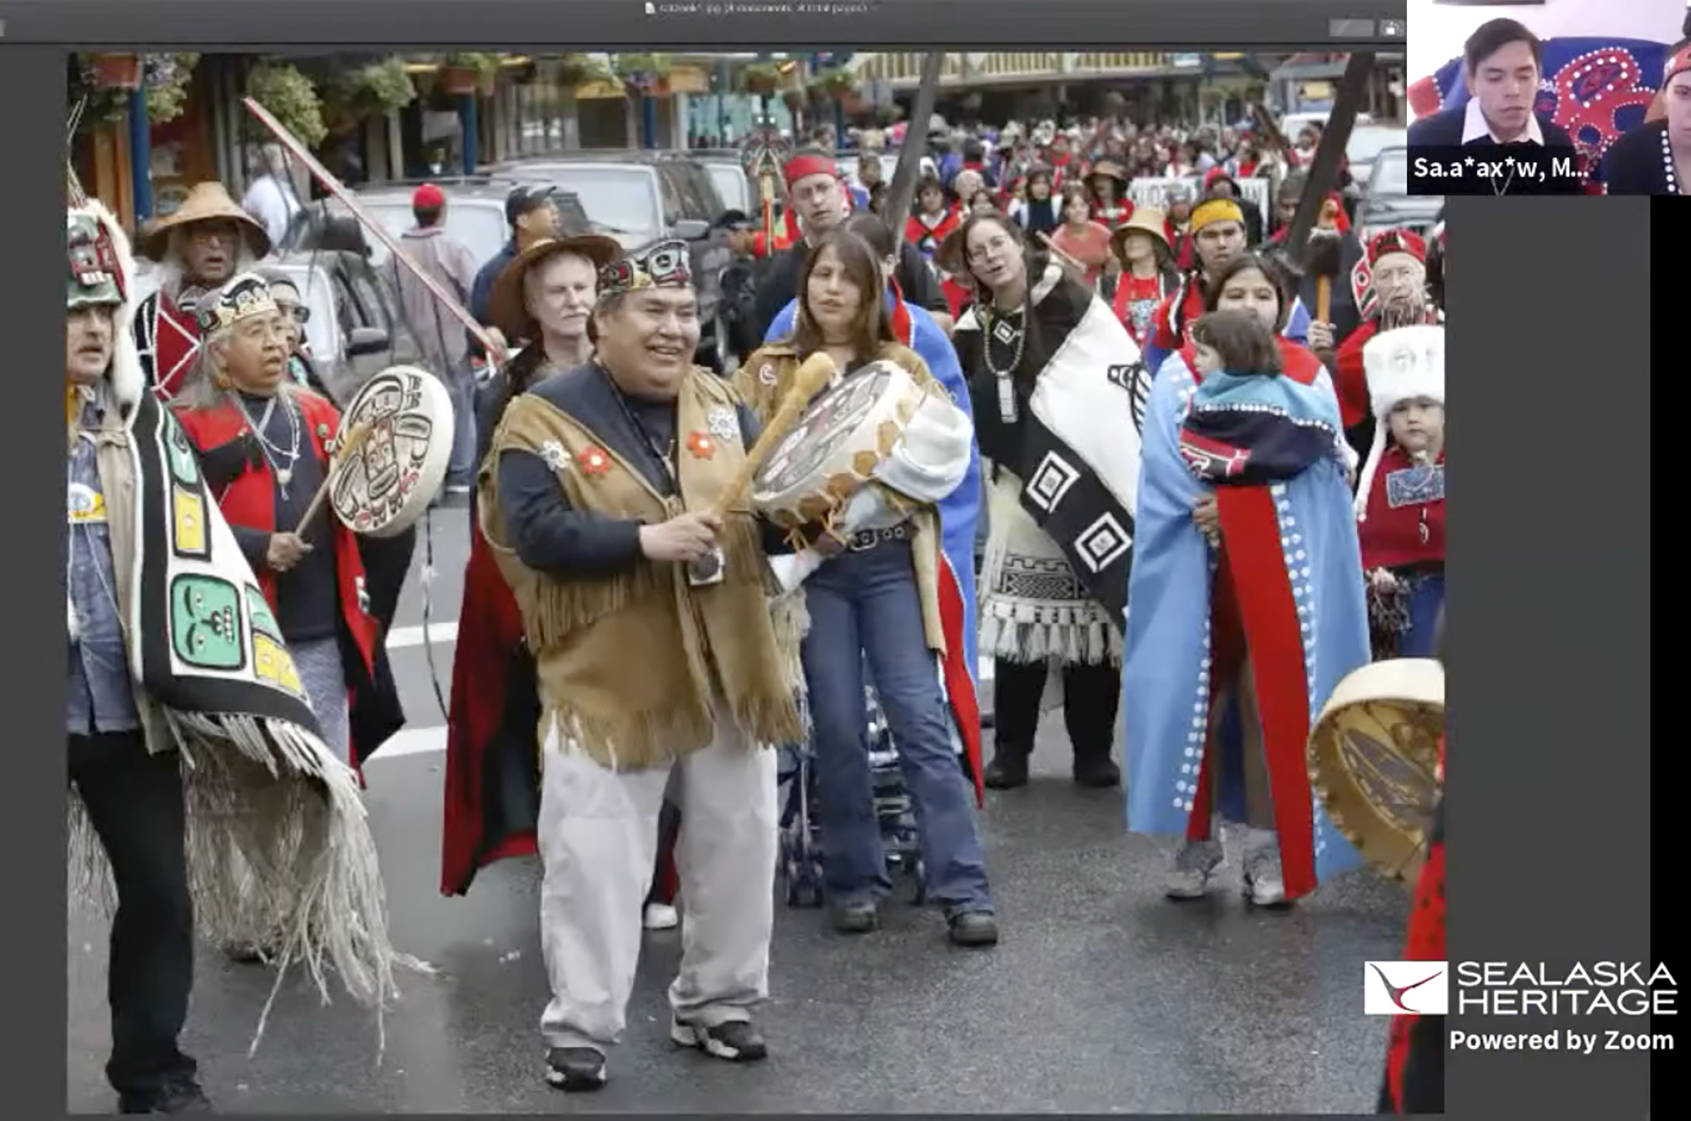 This Nov. 5, 2020, photo provided by the Sealaska Heritage Institute shows a Zoom memorial service for Tlingit elder David Katzeek, conducted by the Institute, showing highlights of Katzeek's life as people honored him over the internet as the pandemic had made in-person ceremonies impossible.  (Sealaska Heritage Institute)